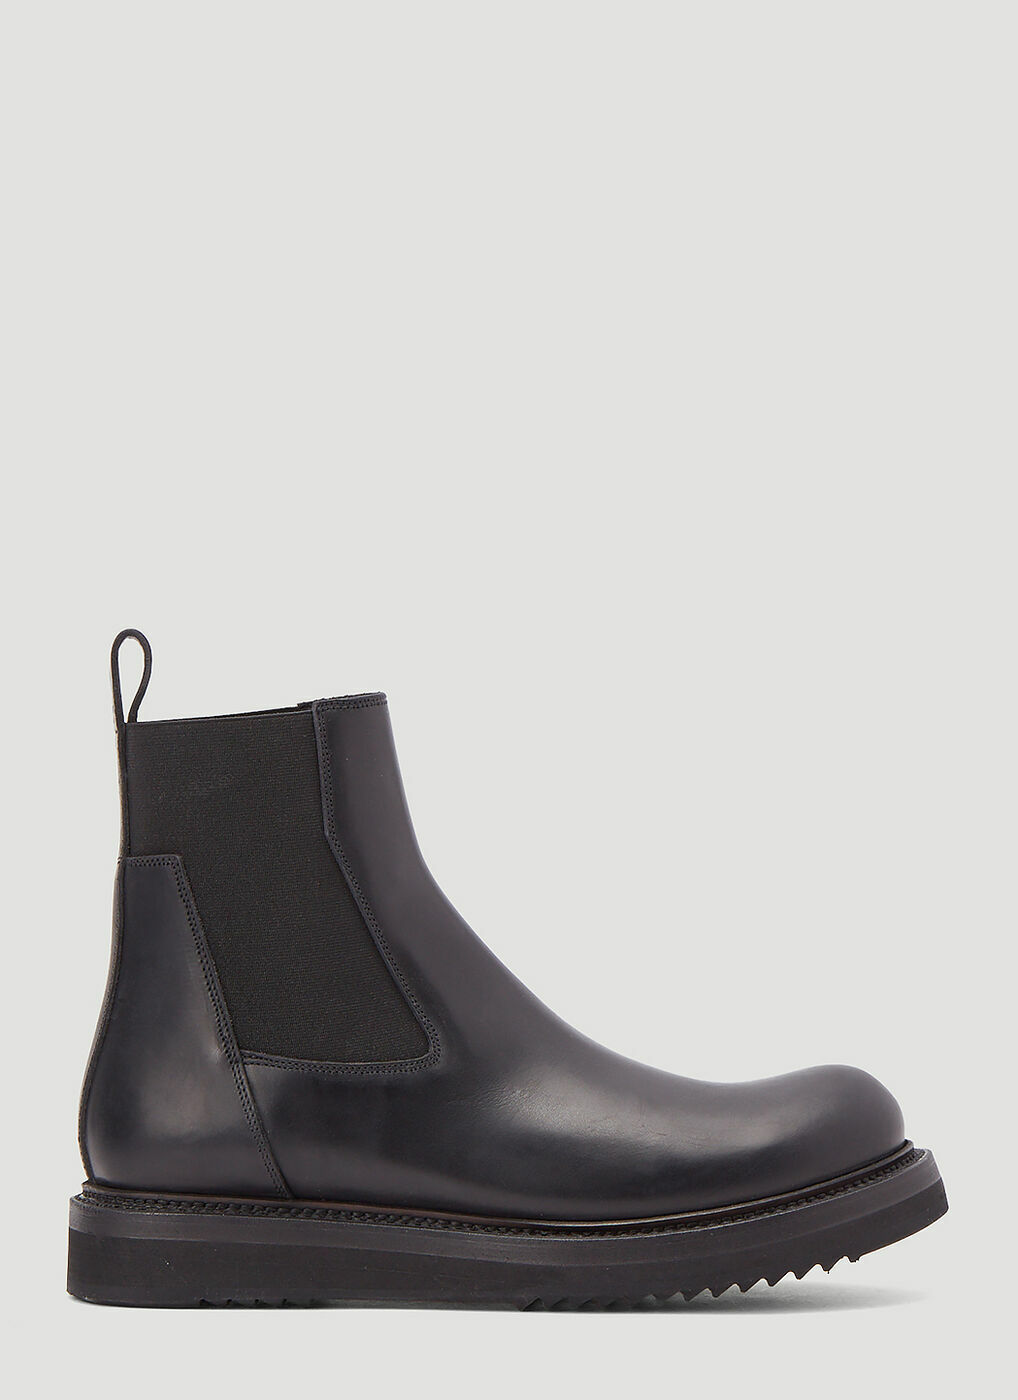 Beatle Creeper Boots in Black